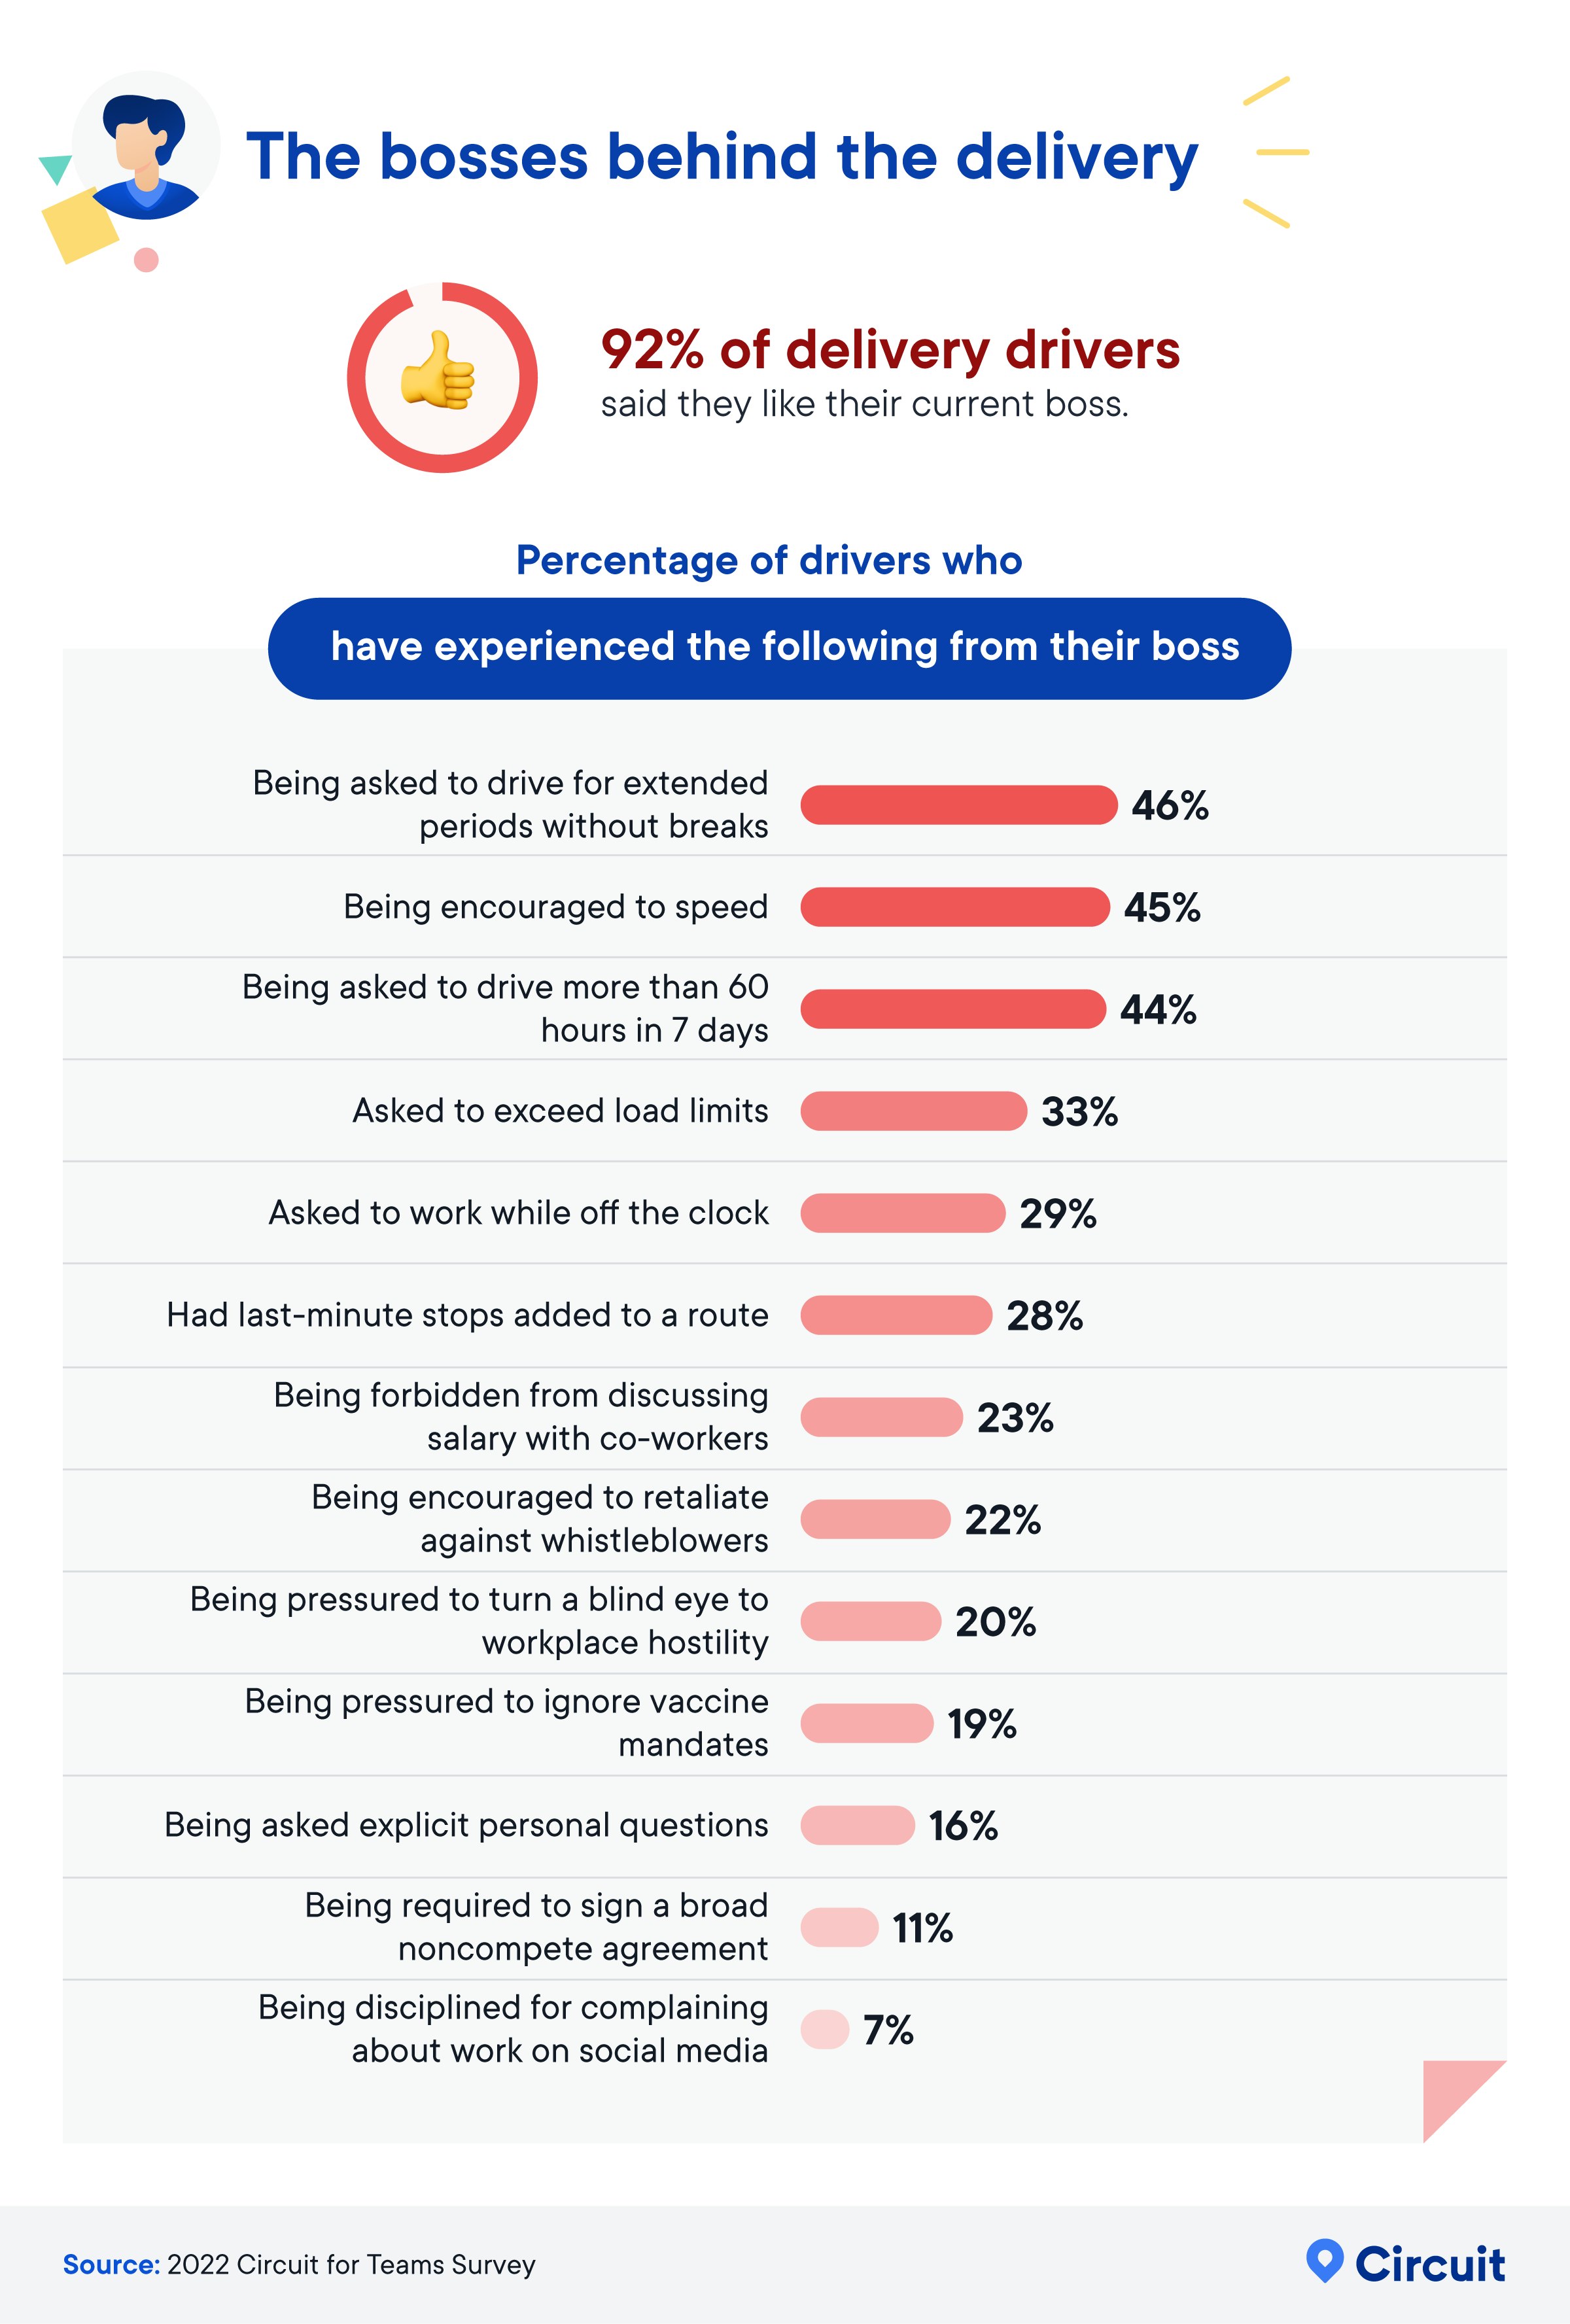 Percentage of drivers who have experienced the following from their boss infographic